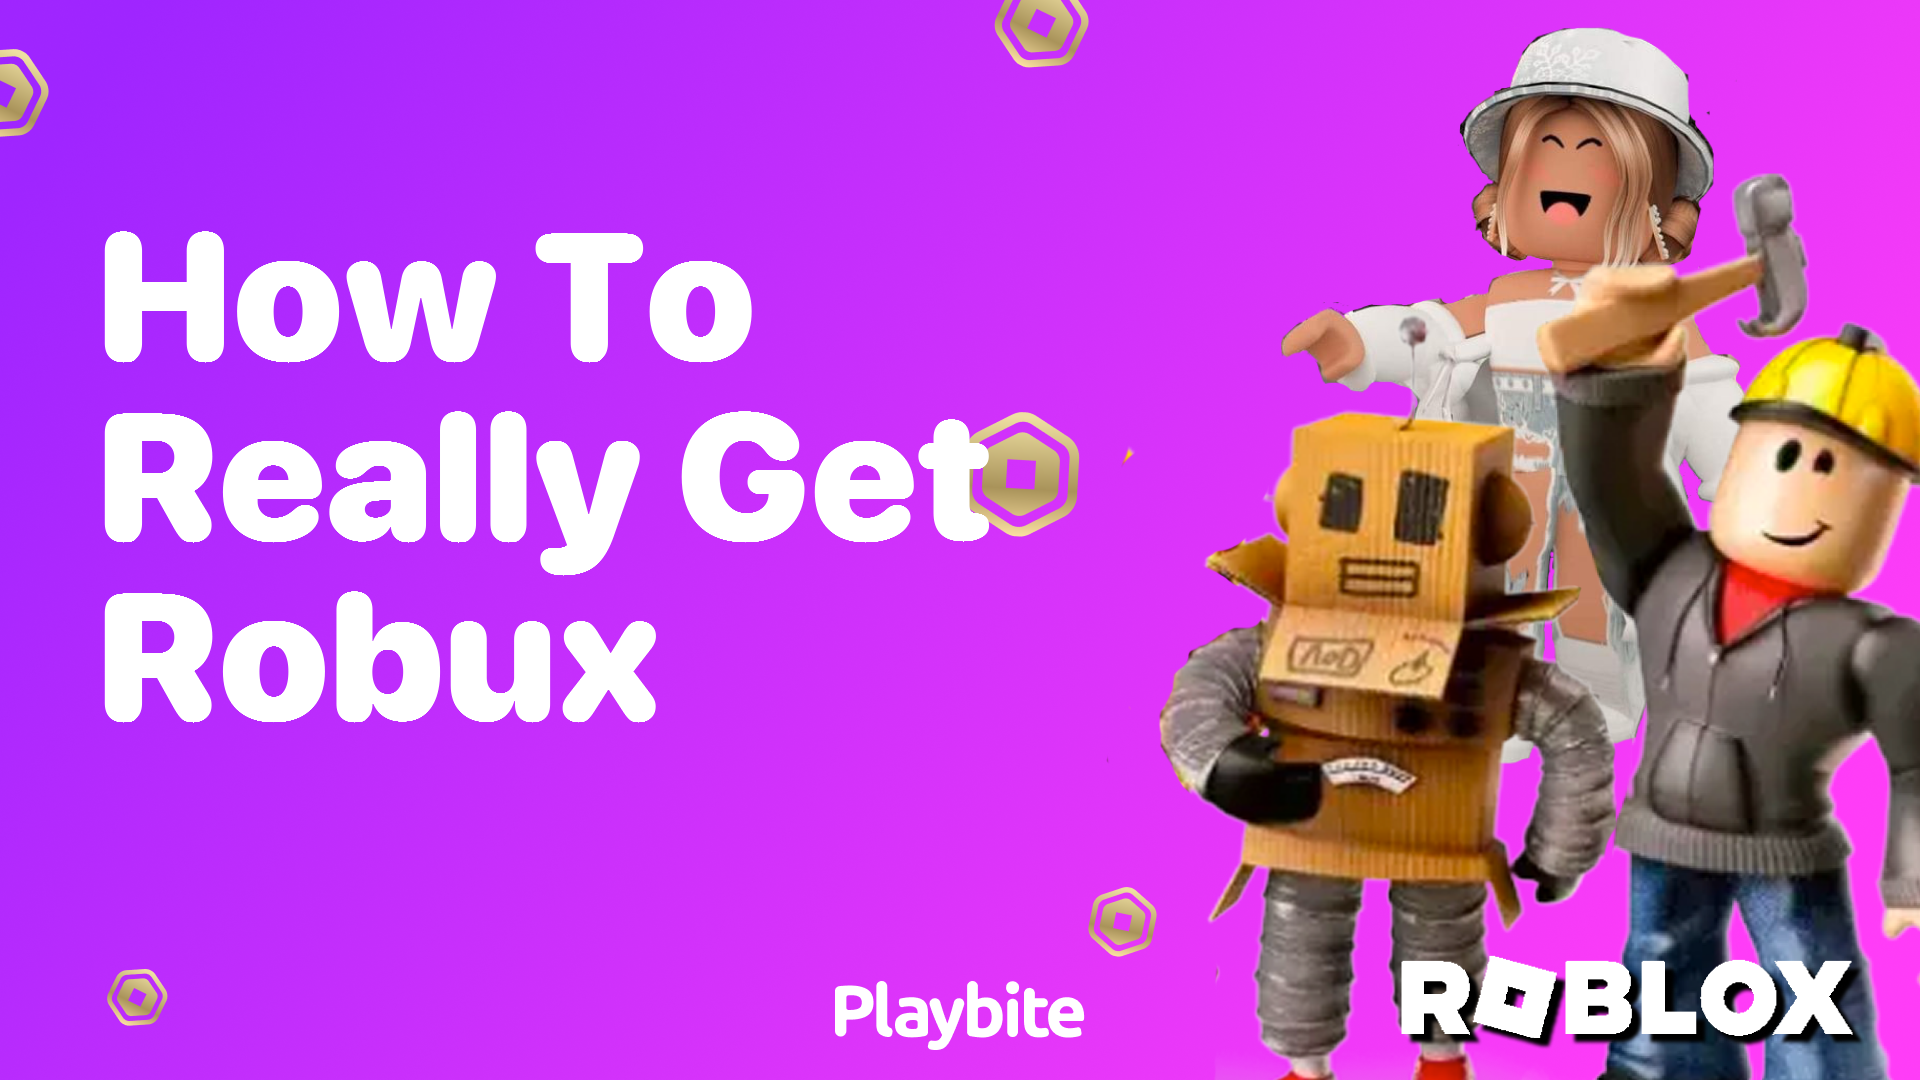 How to Really Get Robux in Roblox